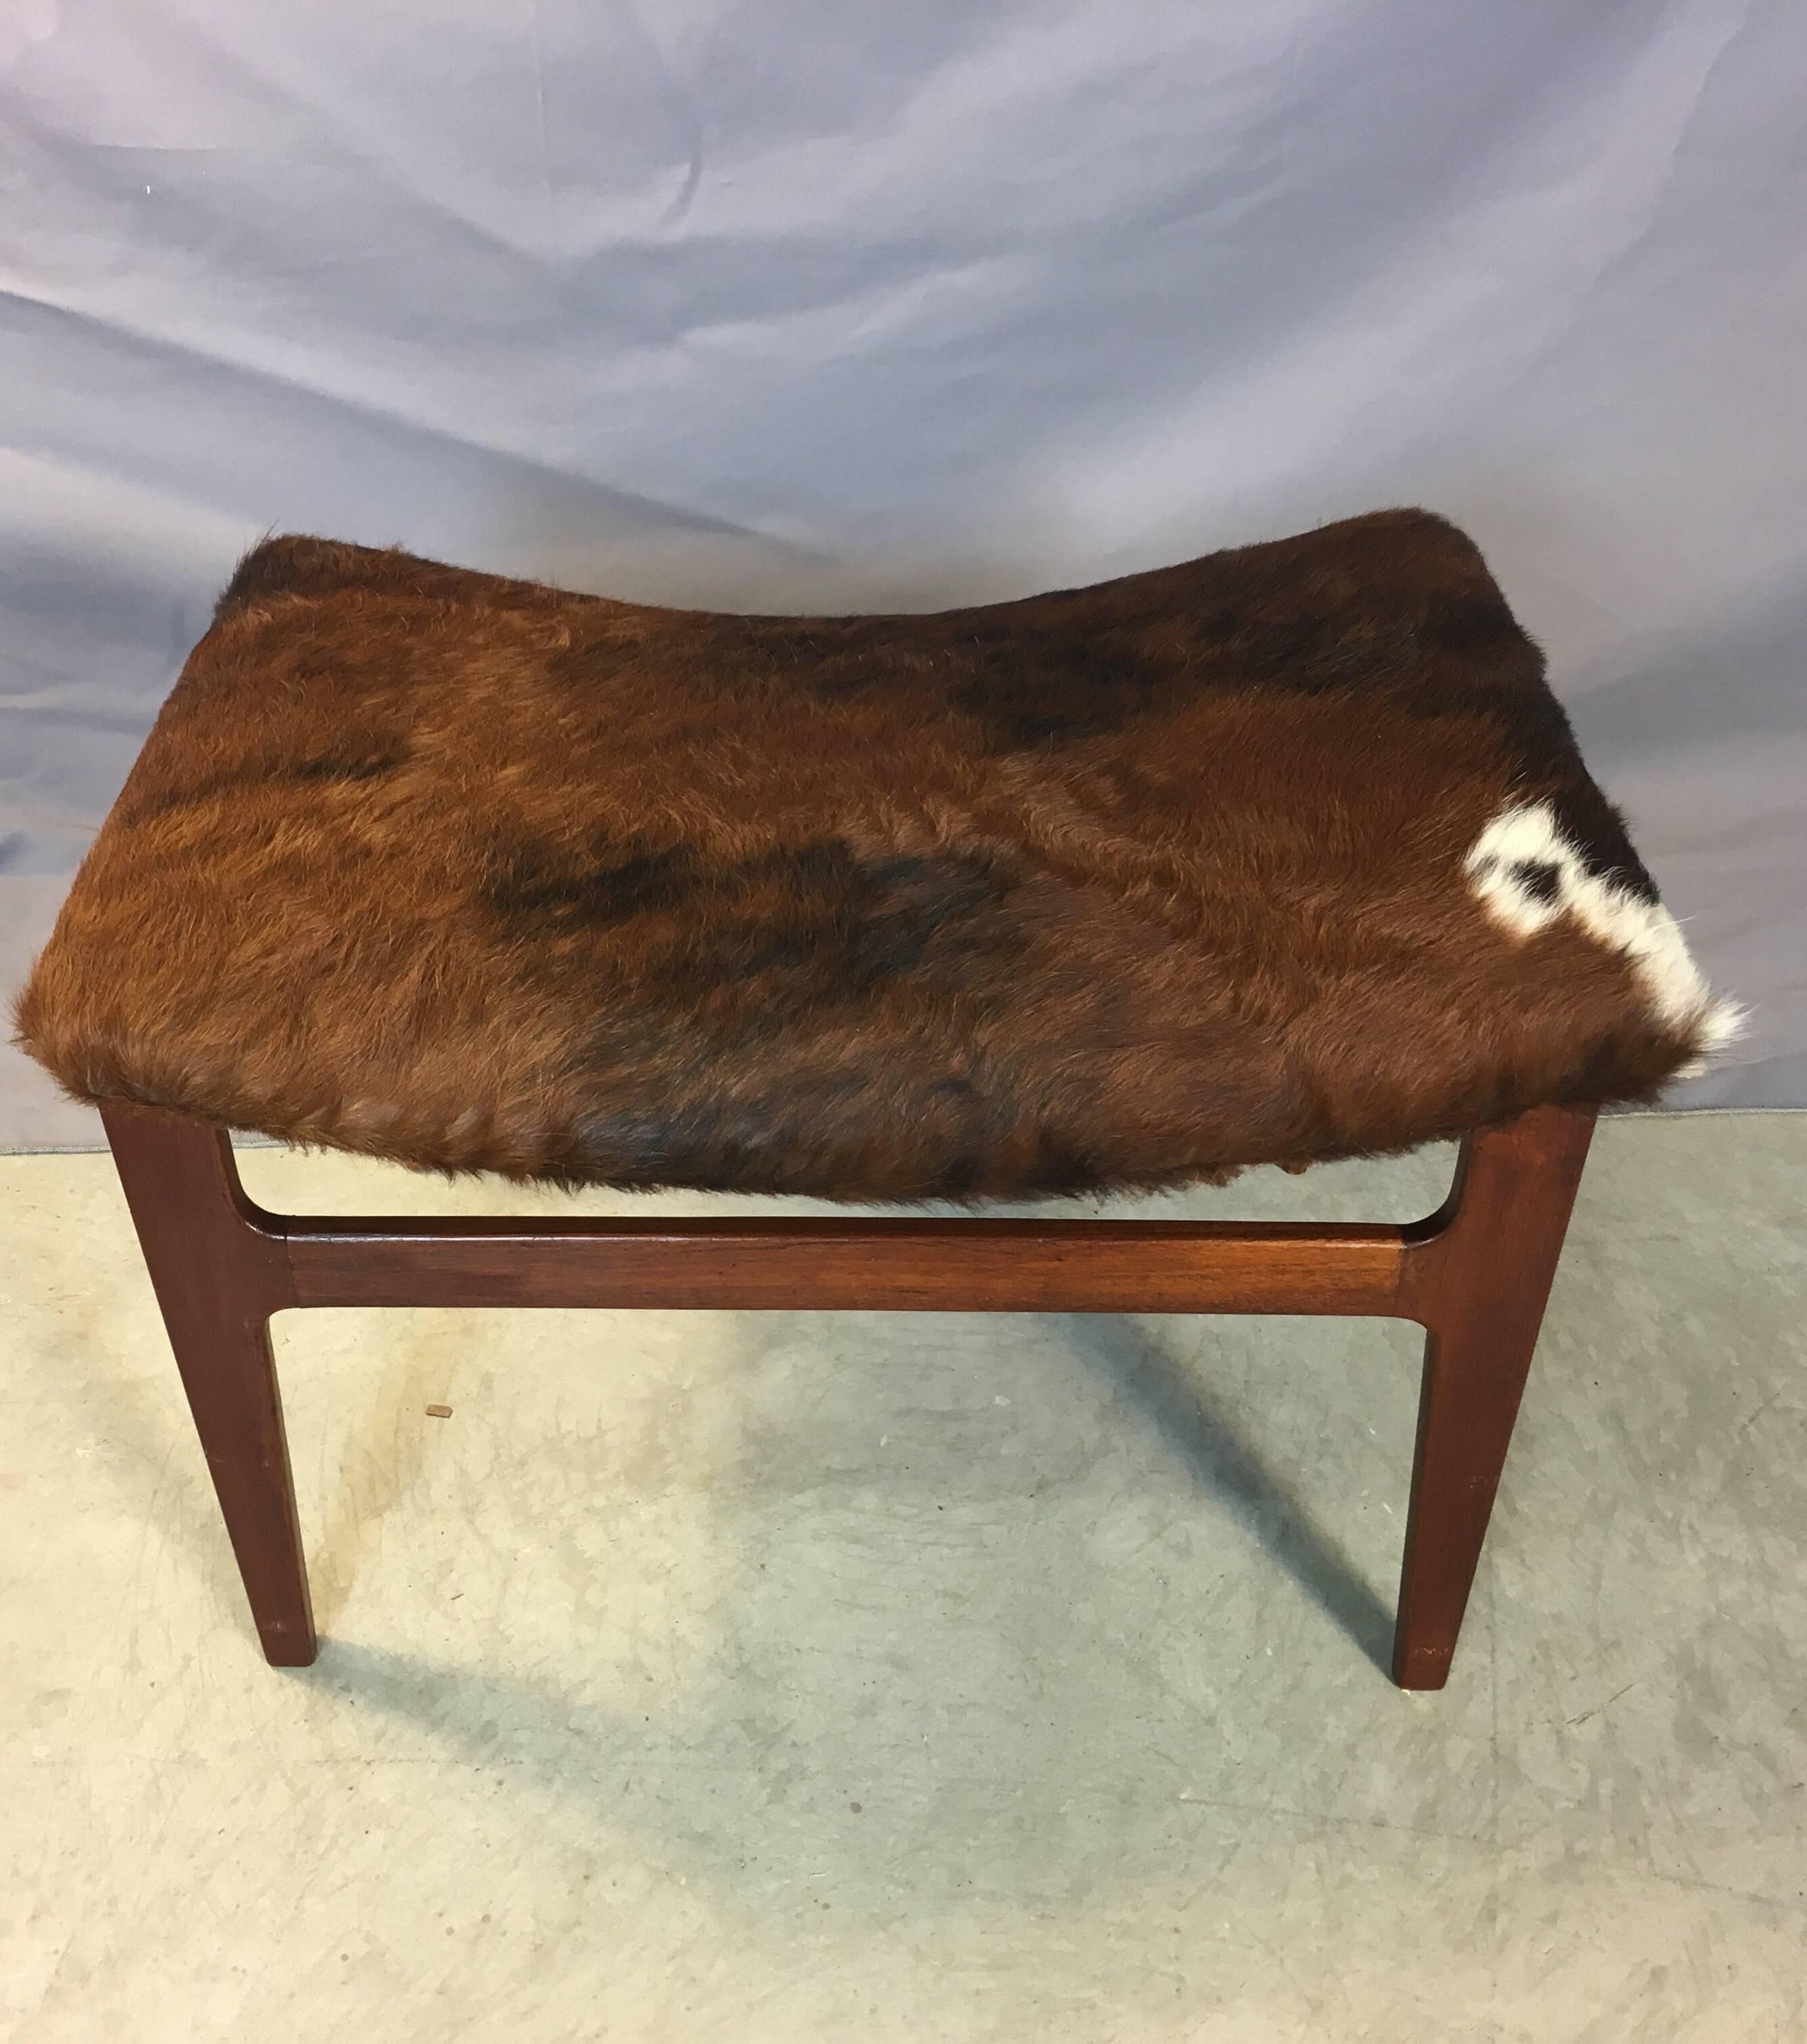 Vintage 1960s walnut wood rectangular footstool with a new brown cowhide seat. No mark.